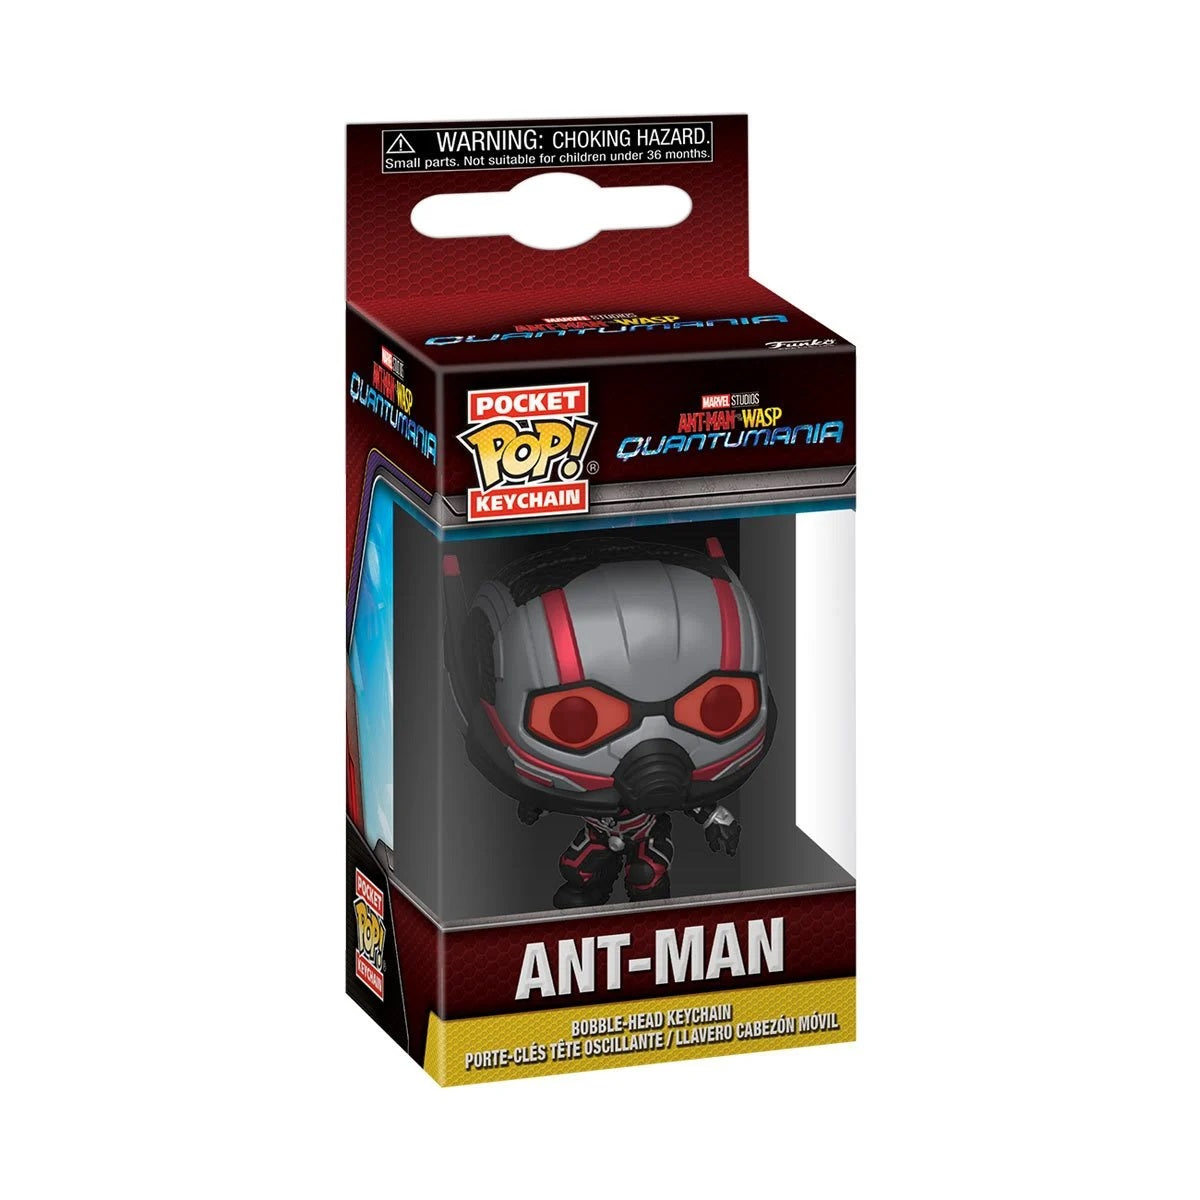 Ant-Man and the Wasp: Quantumania Ant-Man Pocket Pop! Key Chain